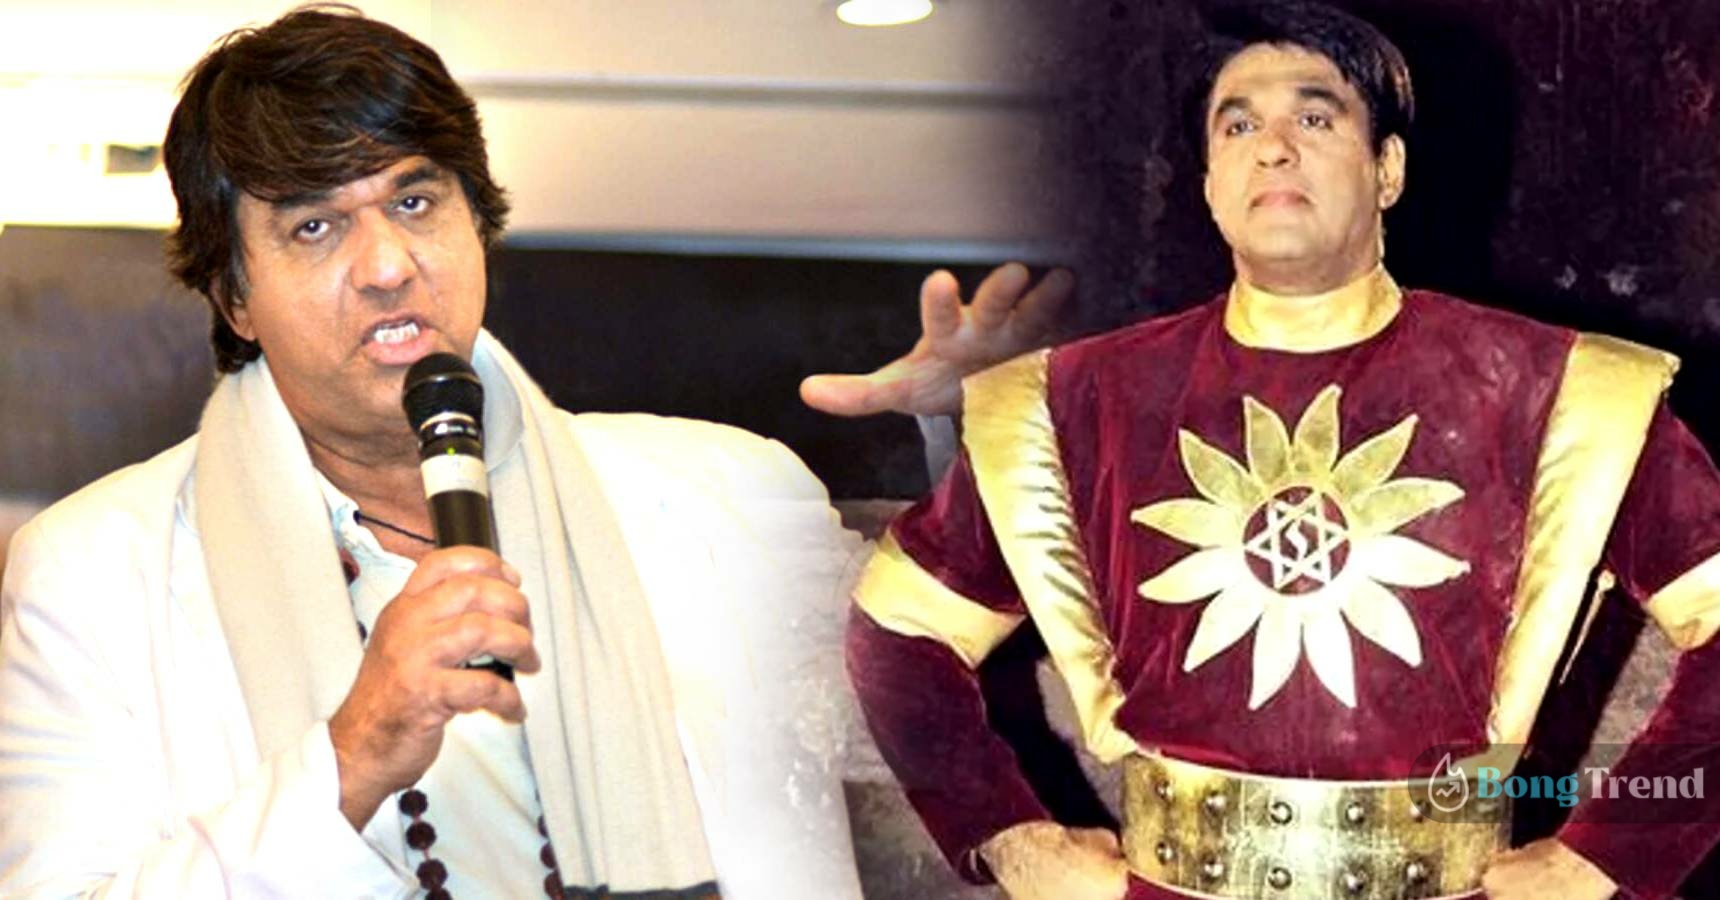 Mukesh Khanna gives a controversial statement on girls, actor gets trolled